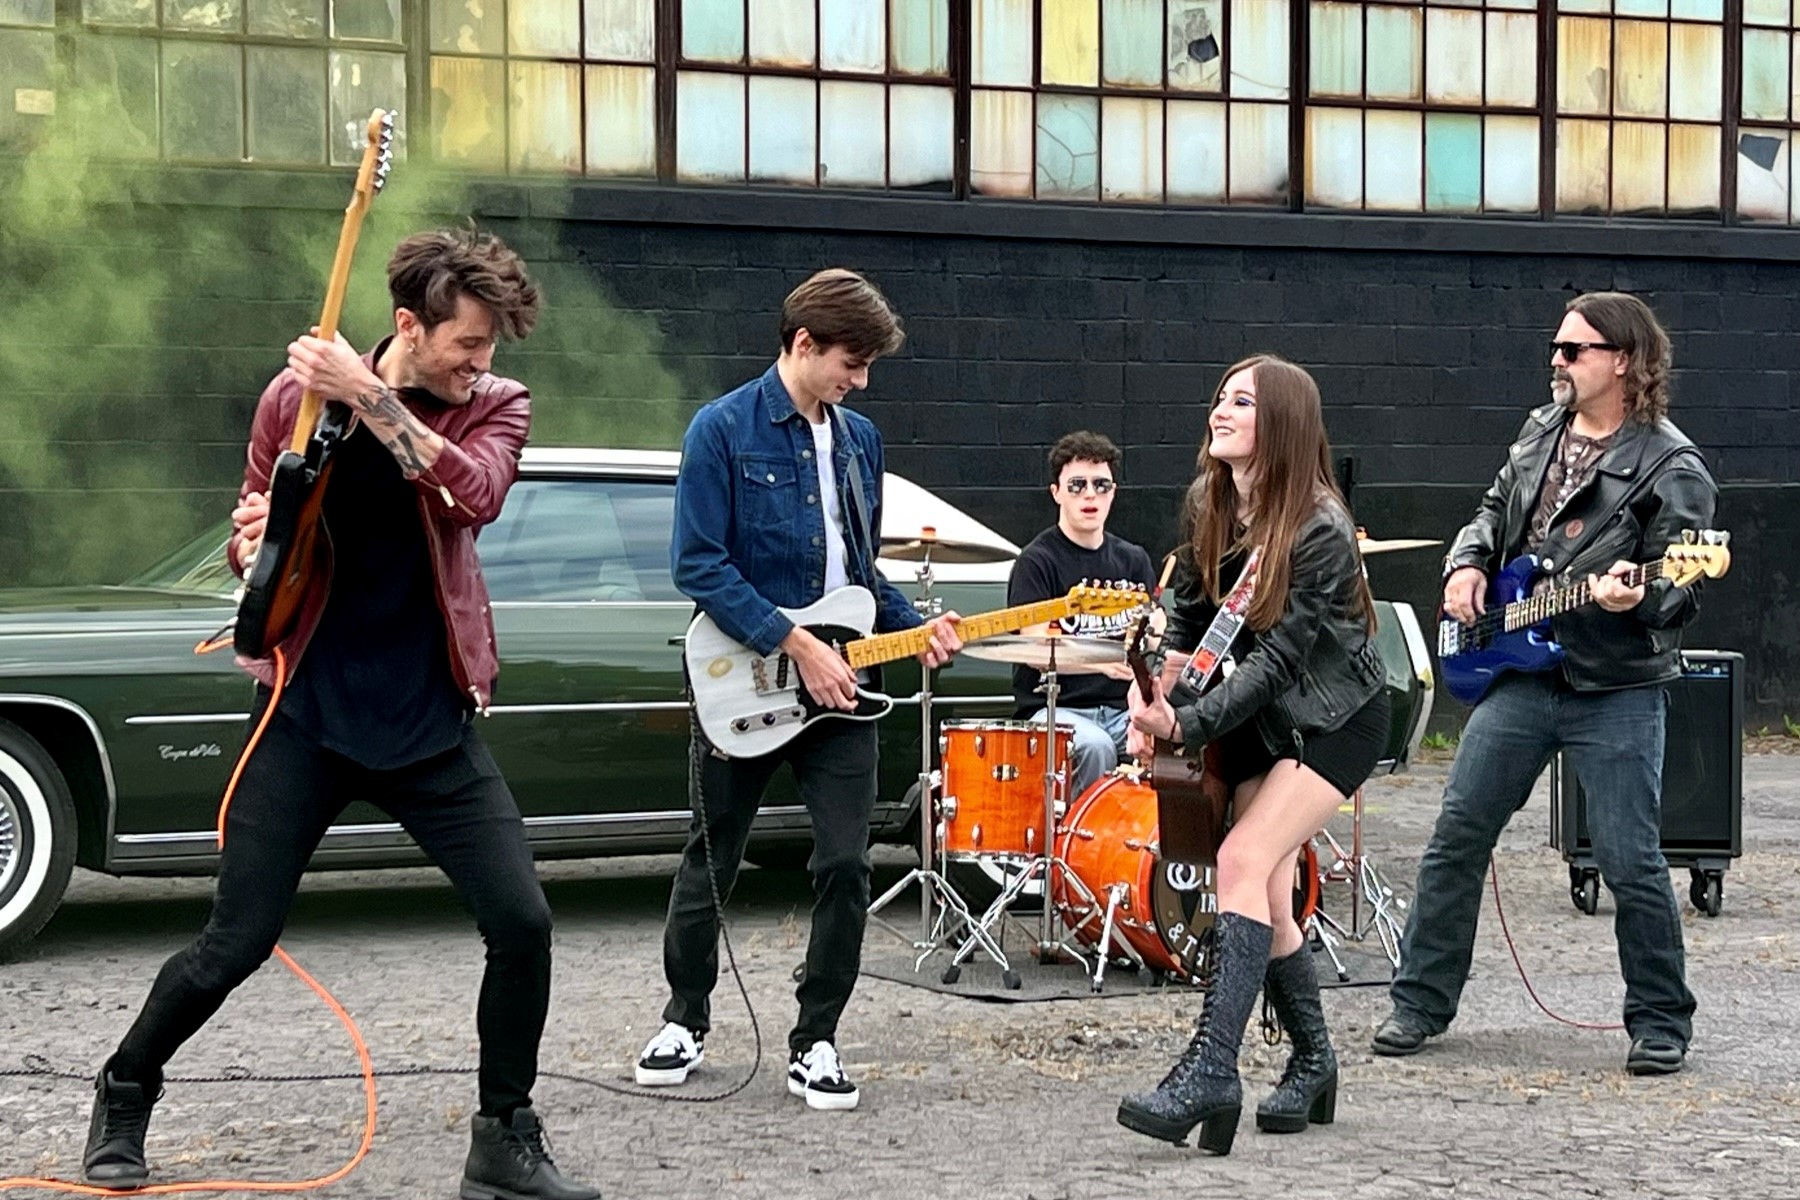 sydney irving band photo performing in front of a warehouse